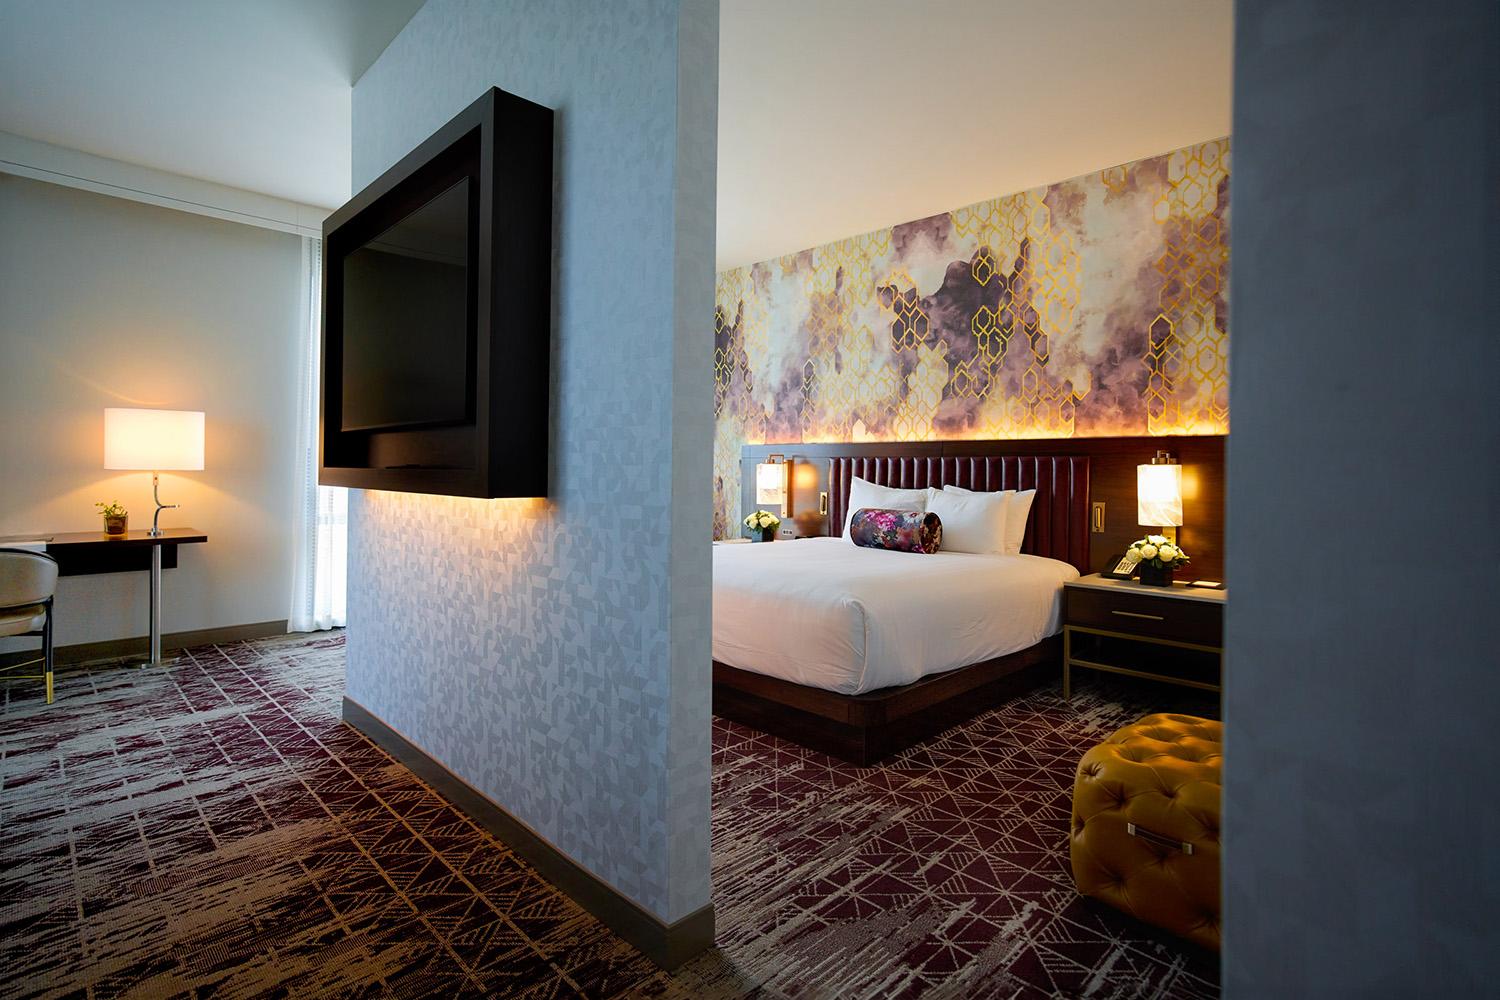 A modern hotel room with a king bed, flat screen TV, geometric carpeting and a yellow ottoman